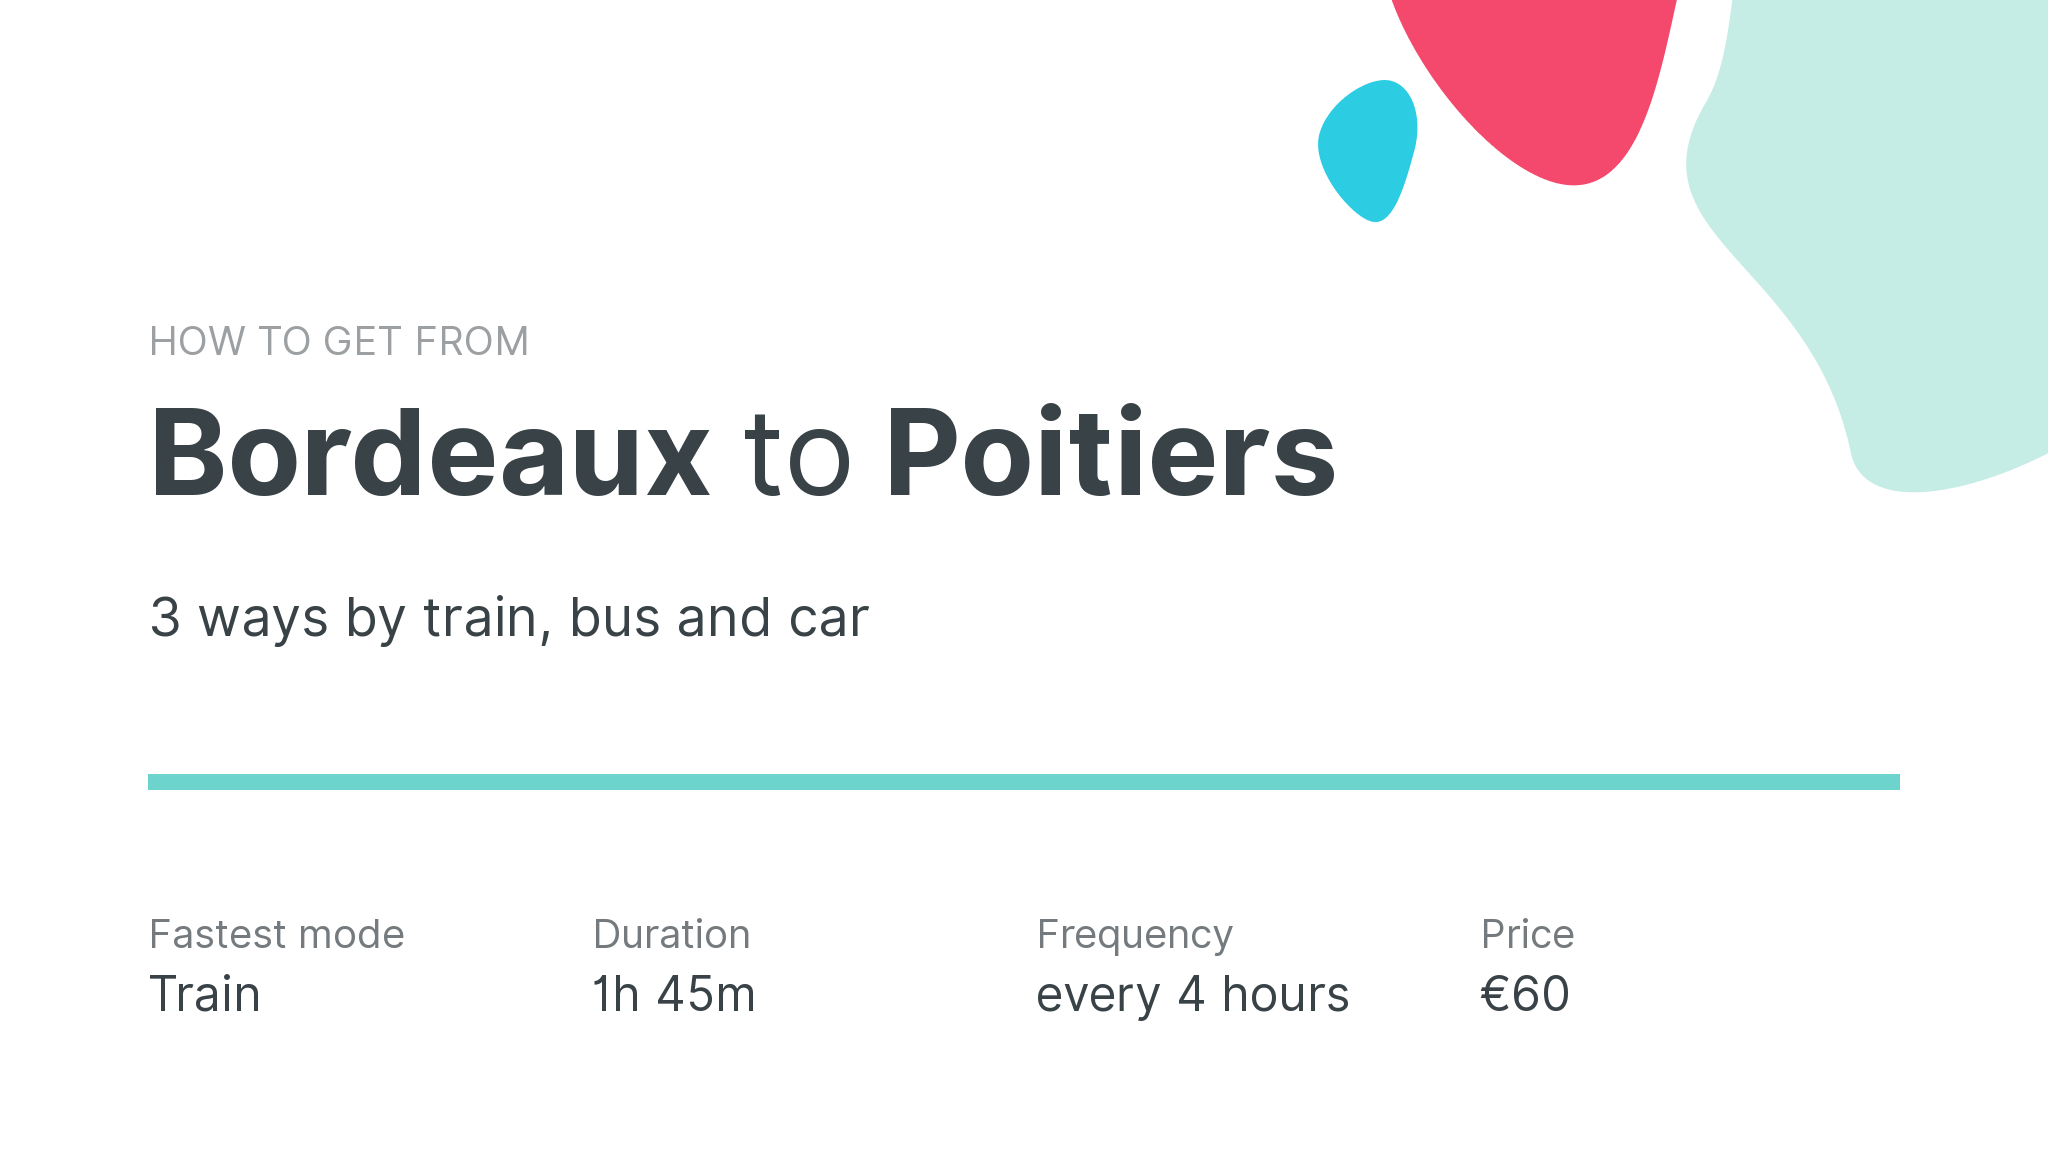 How do I get from Bordeaux to Poitiers